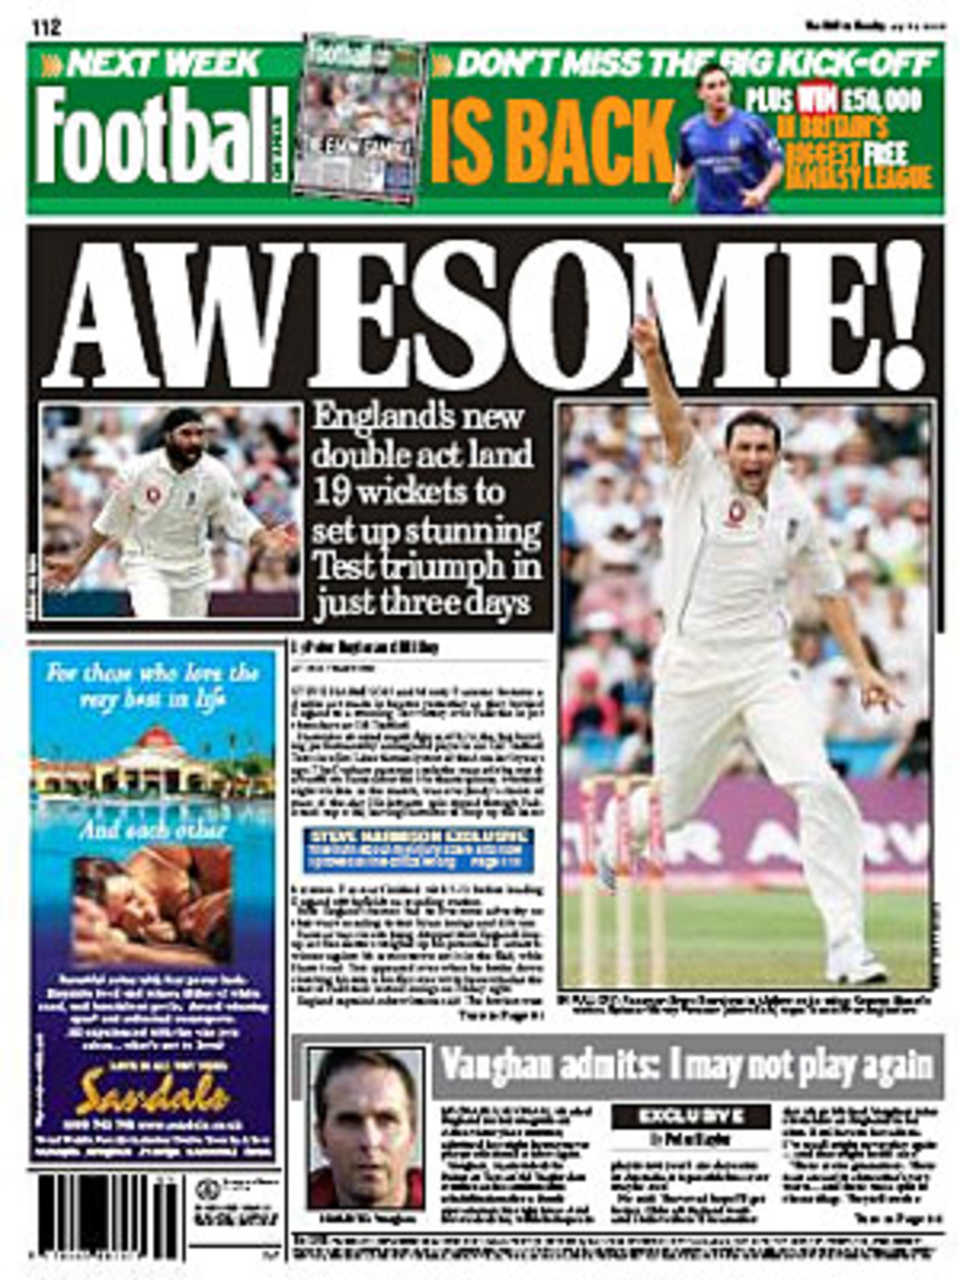 The back page of <I>The Mail On Sunday</I> following England's win